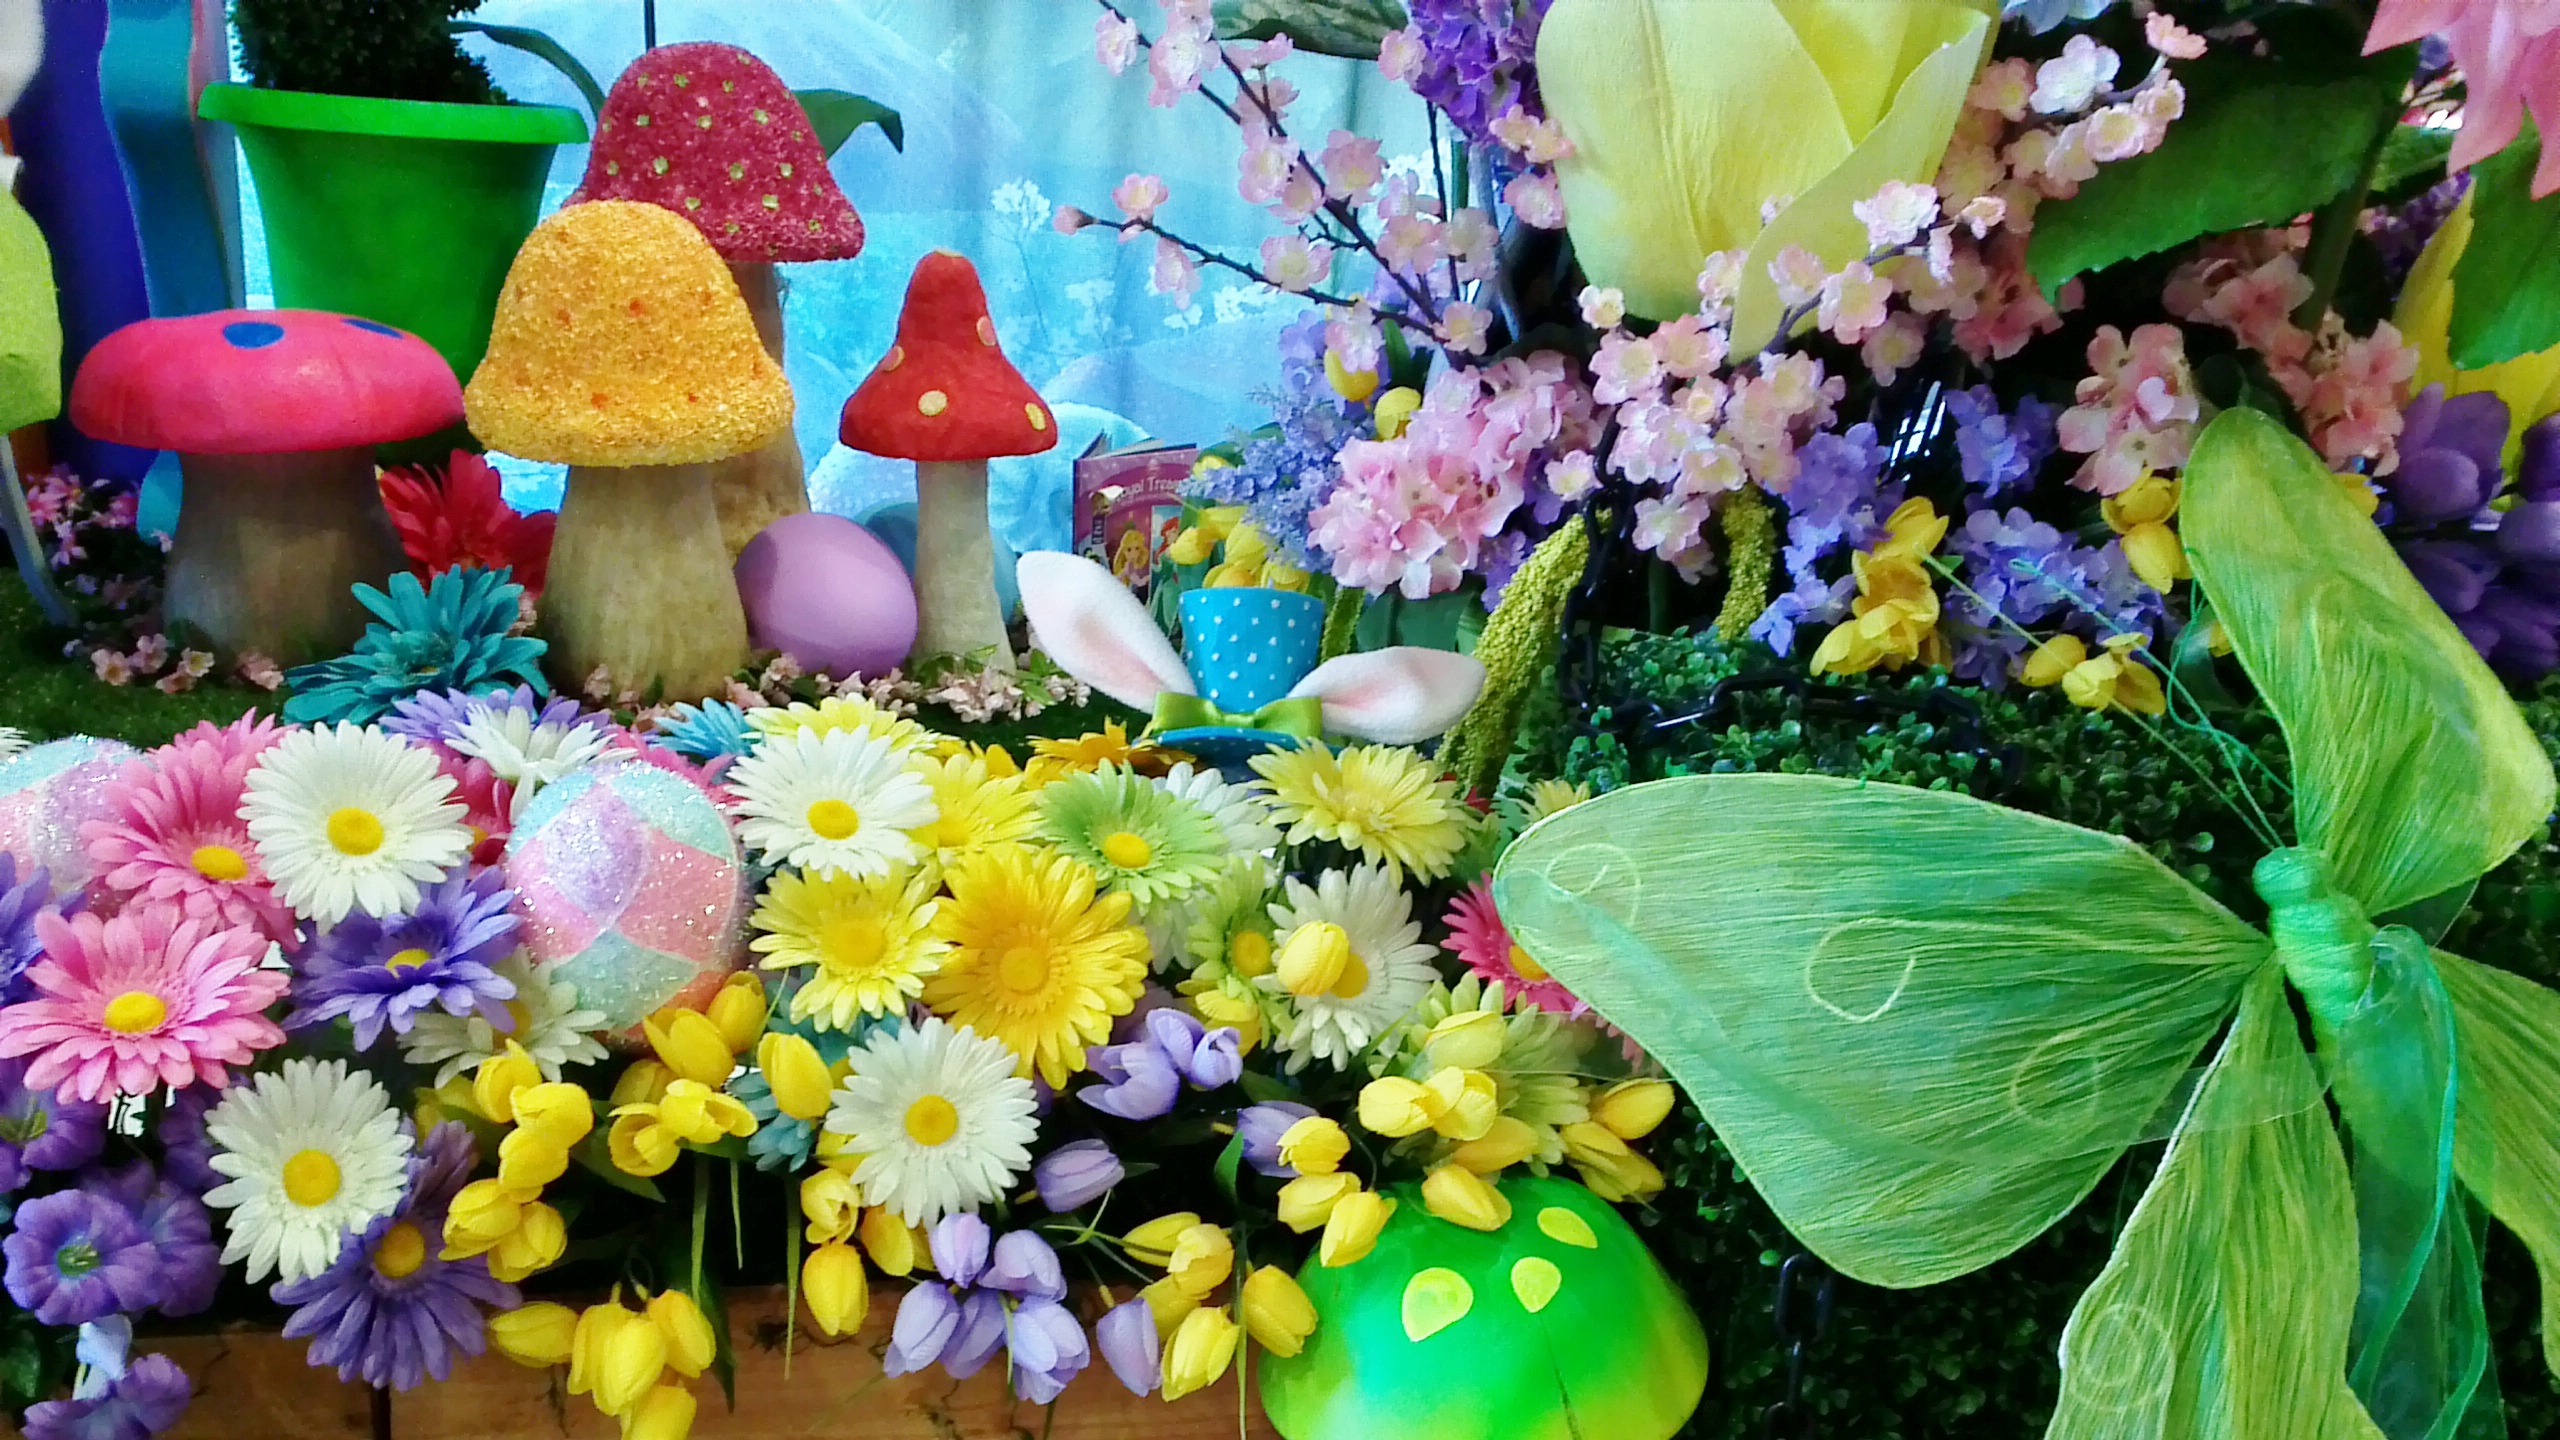 Mad Hatter Easter Tea Party by Mad Hatter Par-Teas on Everyday Party Magazine